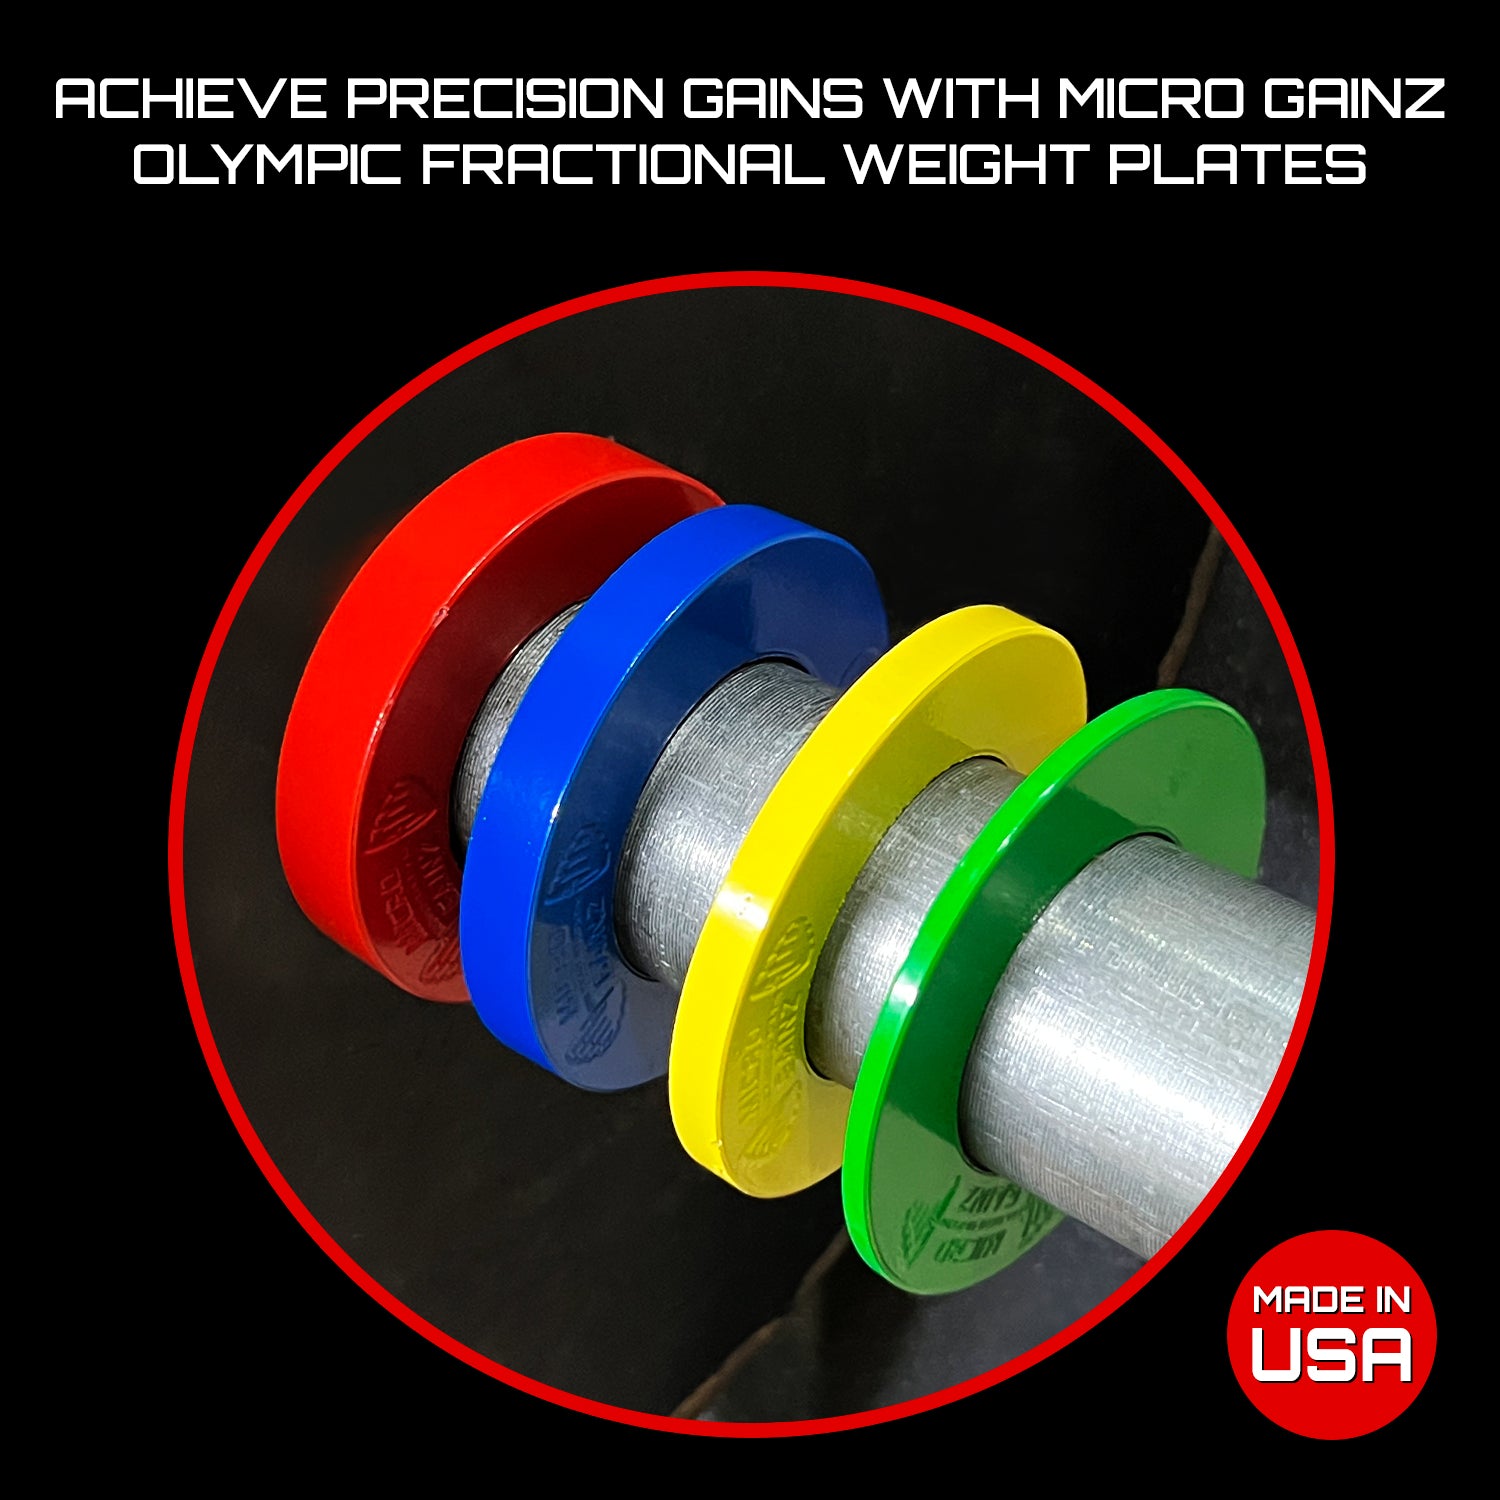 Micro Gainz Multi-Color Olympic Size Fractional Weight Plates Set of 8 Plates .25LB-1LB  w/ Bag